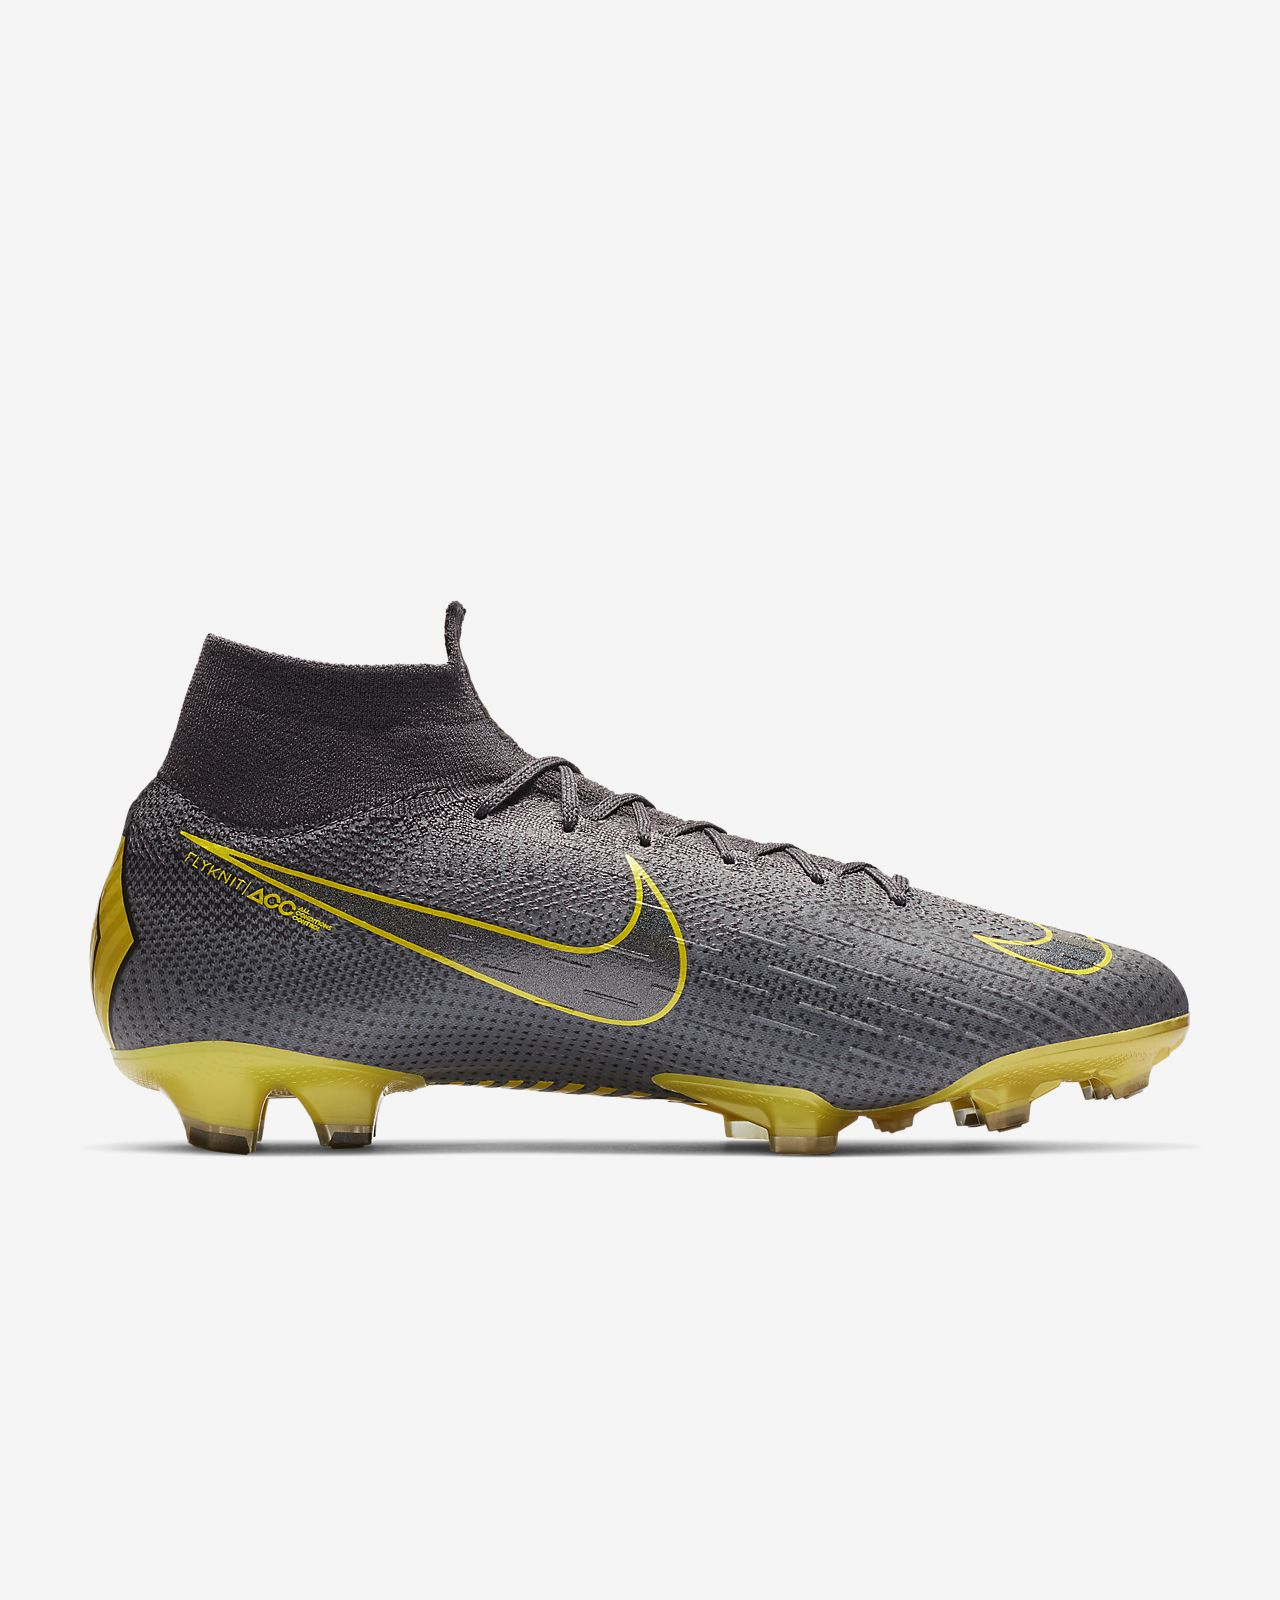 Nike Mercurial Superfly VII Products online Shop Outlet.